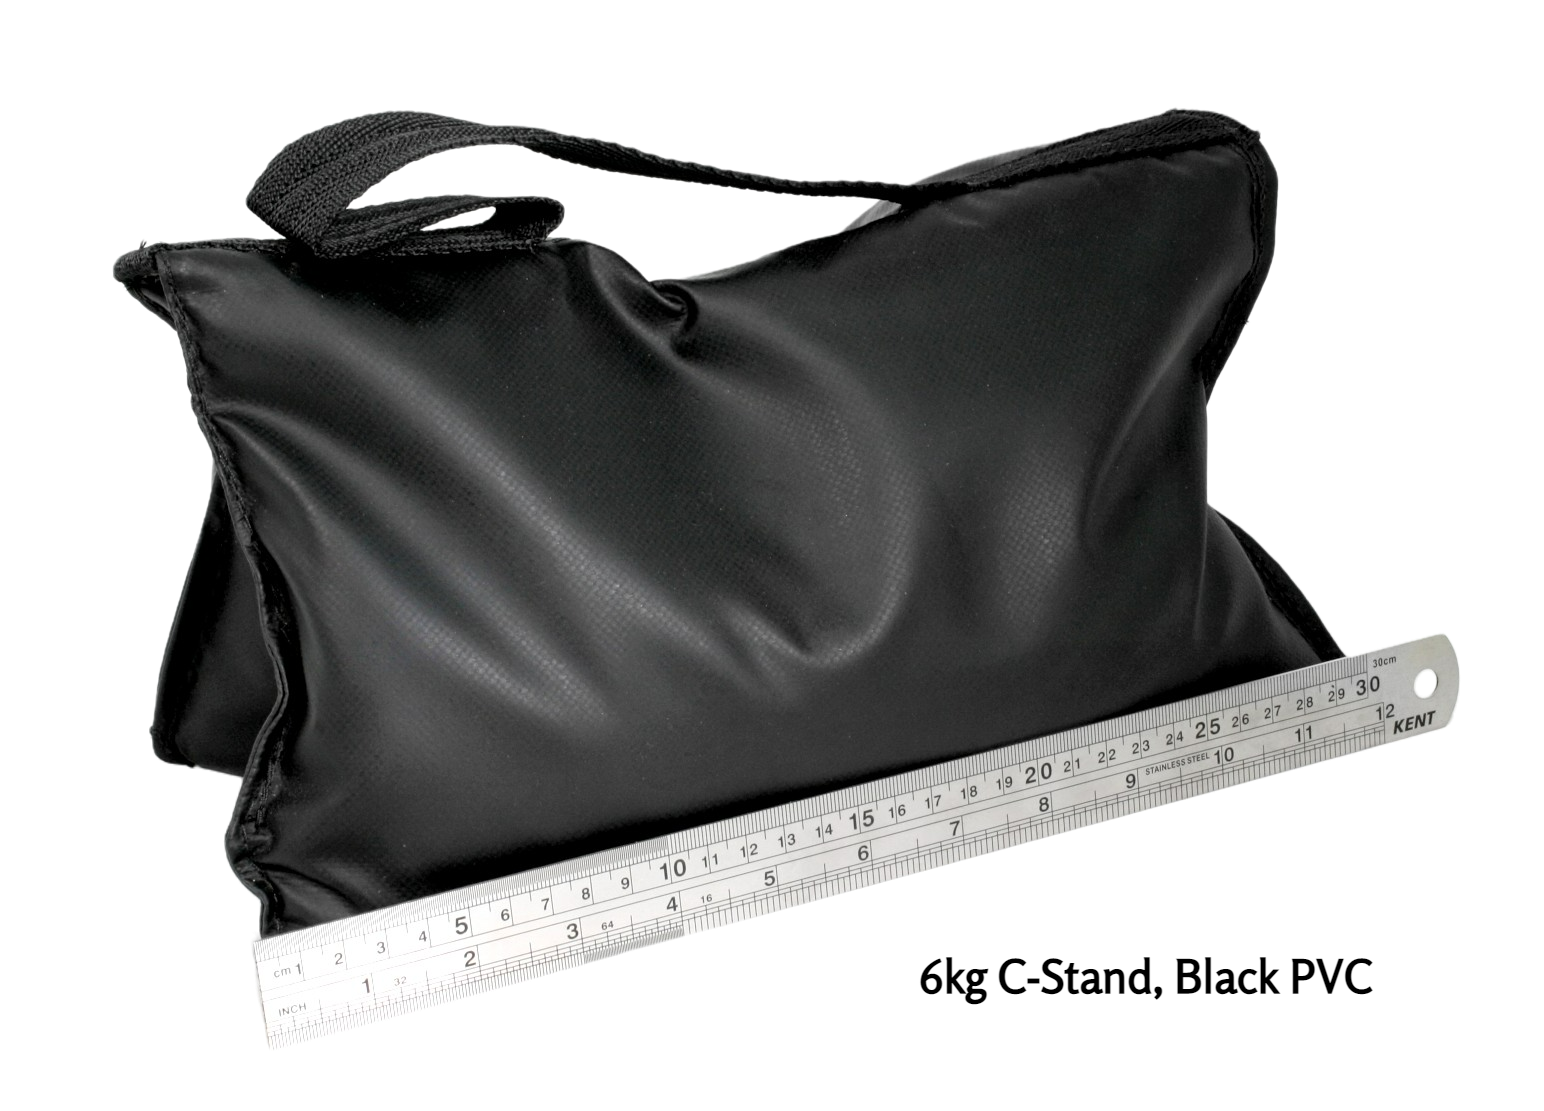 A 6kg C-stand sandbag in black PVC fabric, next to a ruler showing the sandbag is approximately 30cm long